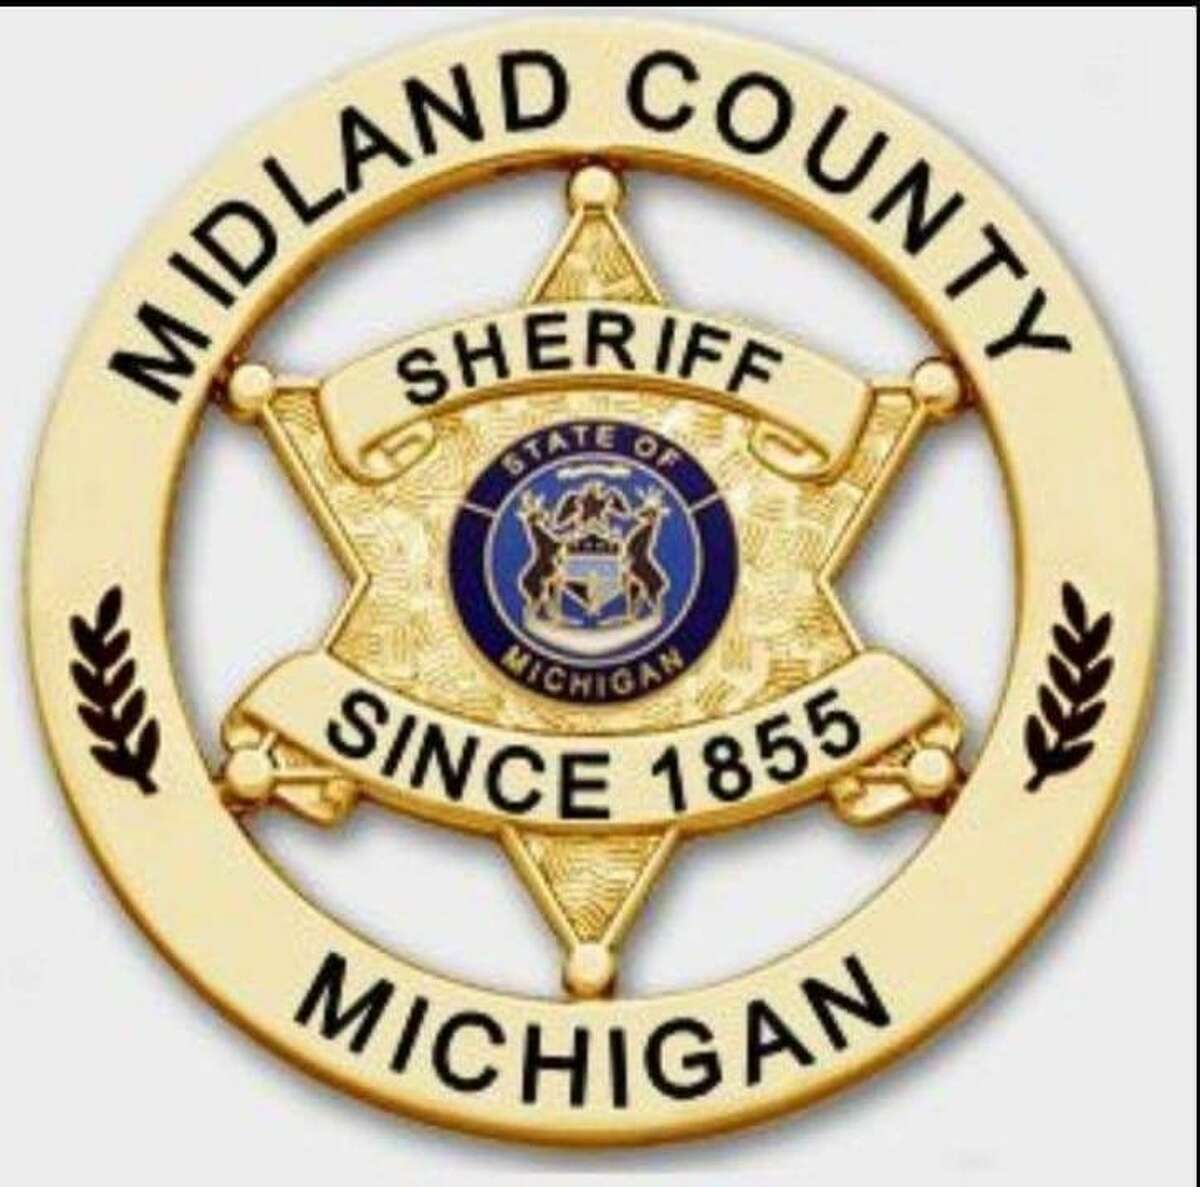 Midland County Sheriff's Department.